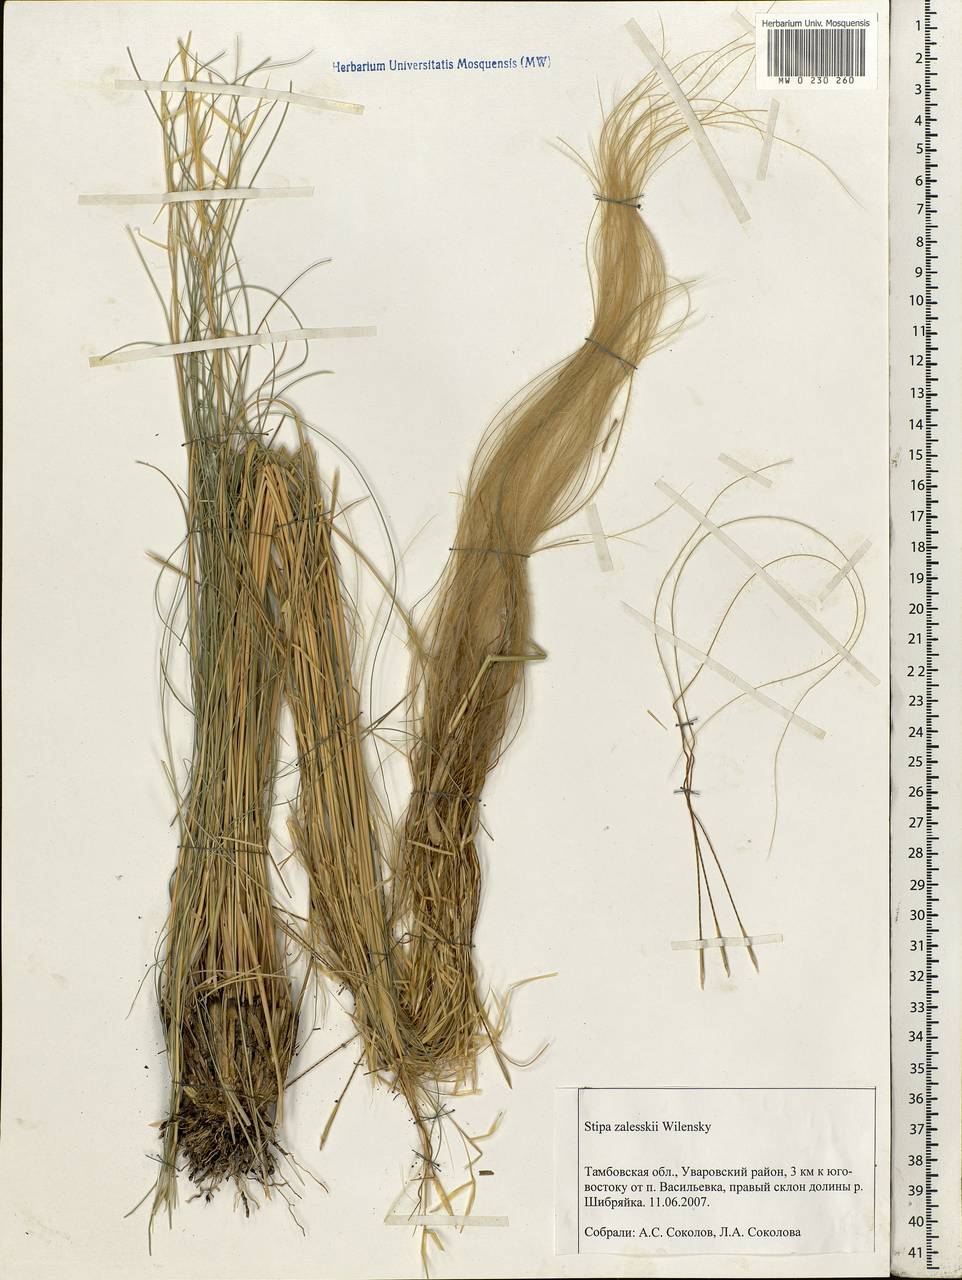 Stipa zalesskyi Wilensky ex Grossh., Eastern Europe, Central forest-and-steppe region (E6) (Russia)